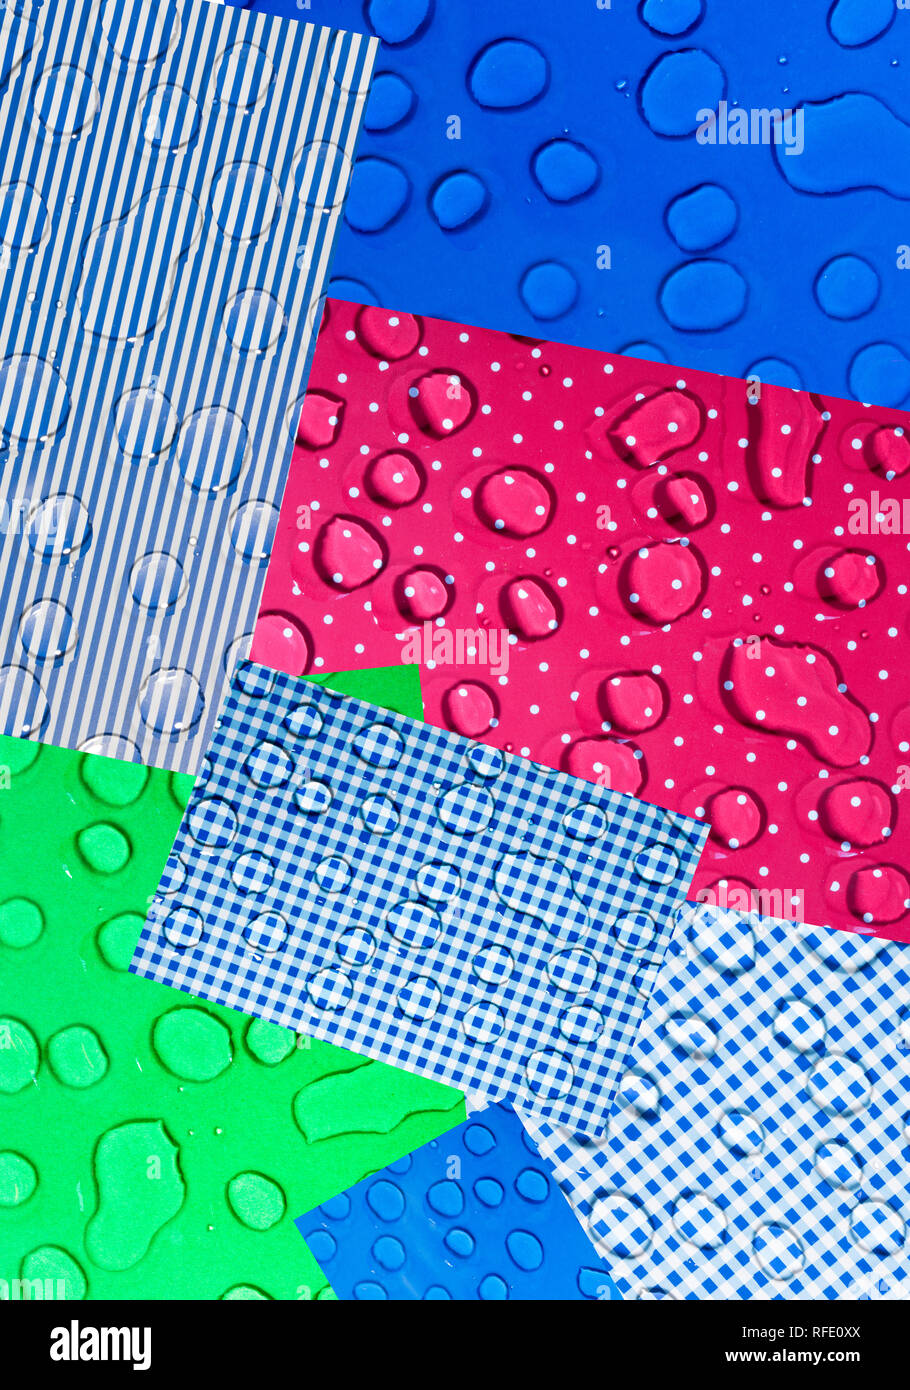 Abstract collage of color images with water drops Stock Photo